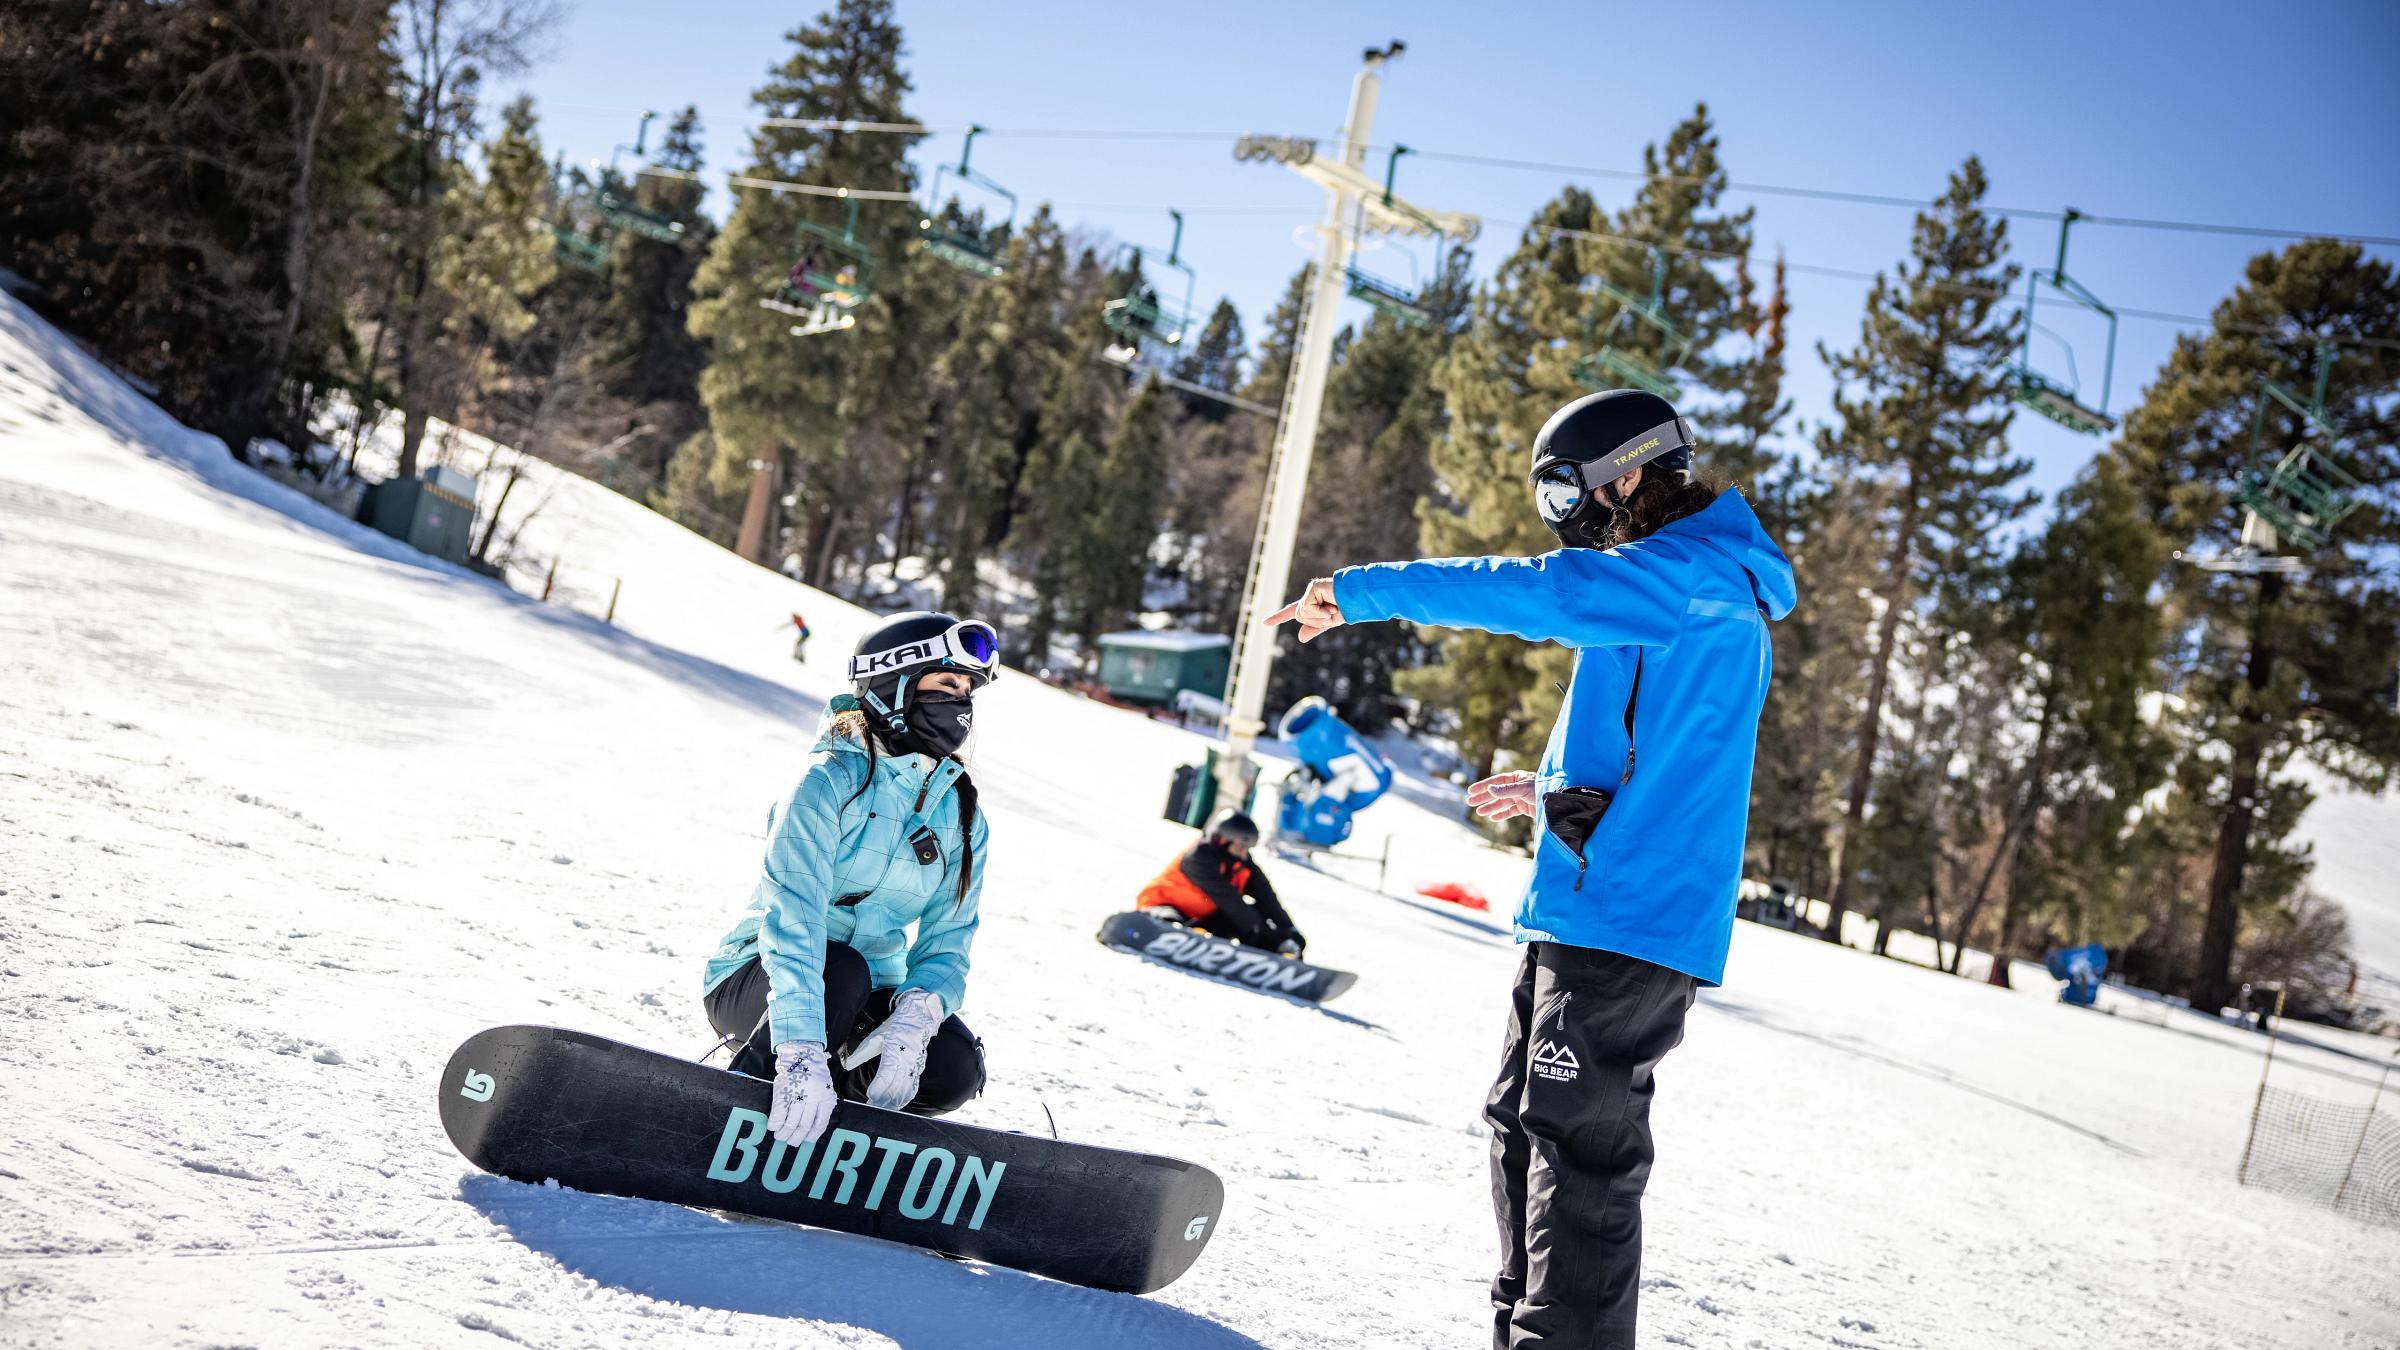 Snowboarding holding hands to instructor for balance.